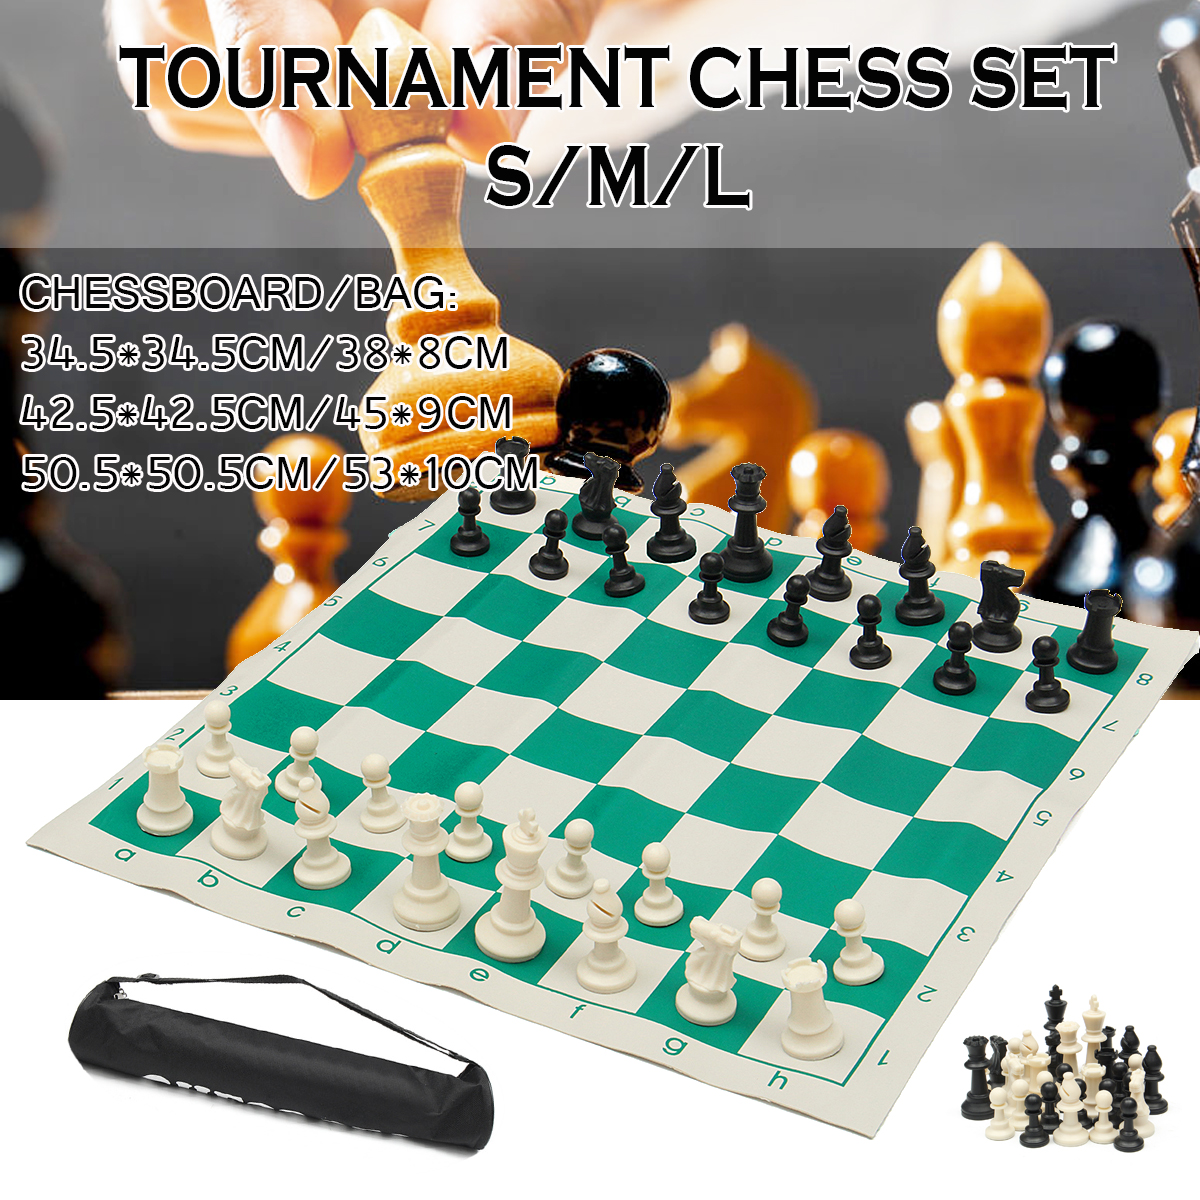 Plastic-Gambit-Tournament-Chess-Set-Roll-up-Mat-And-Bag-Camping-Travel-Gifts-Portable-Travelling-New-1641520-1